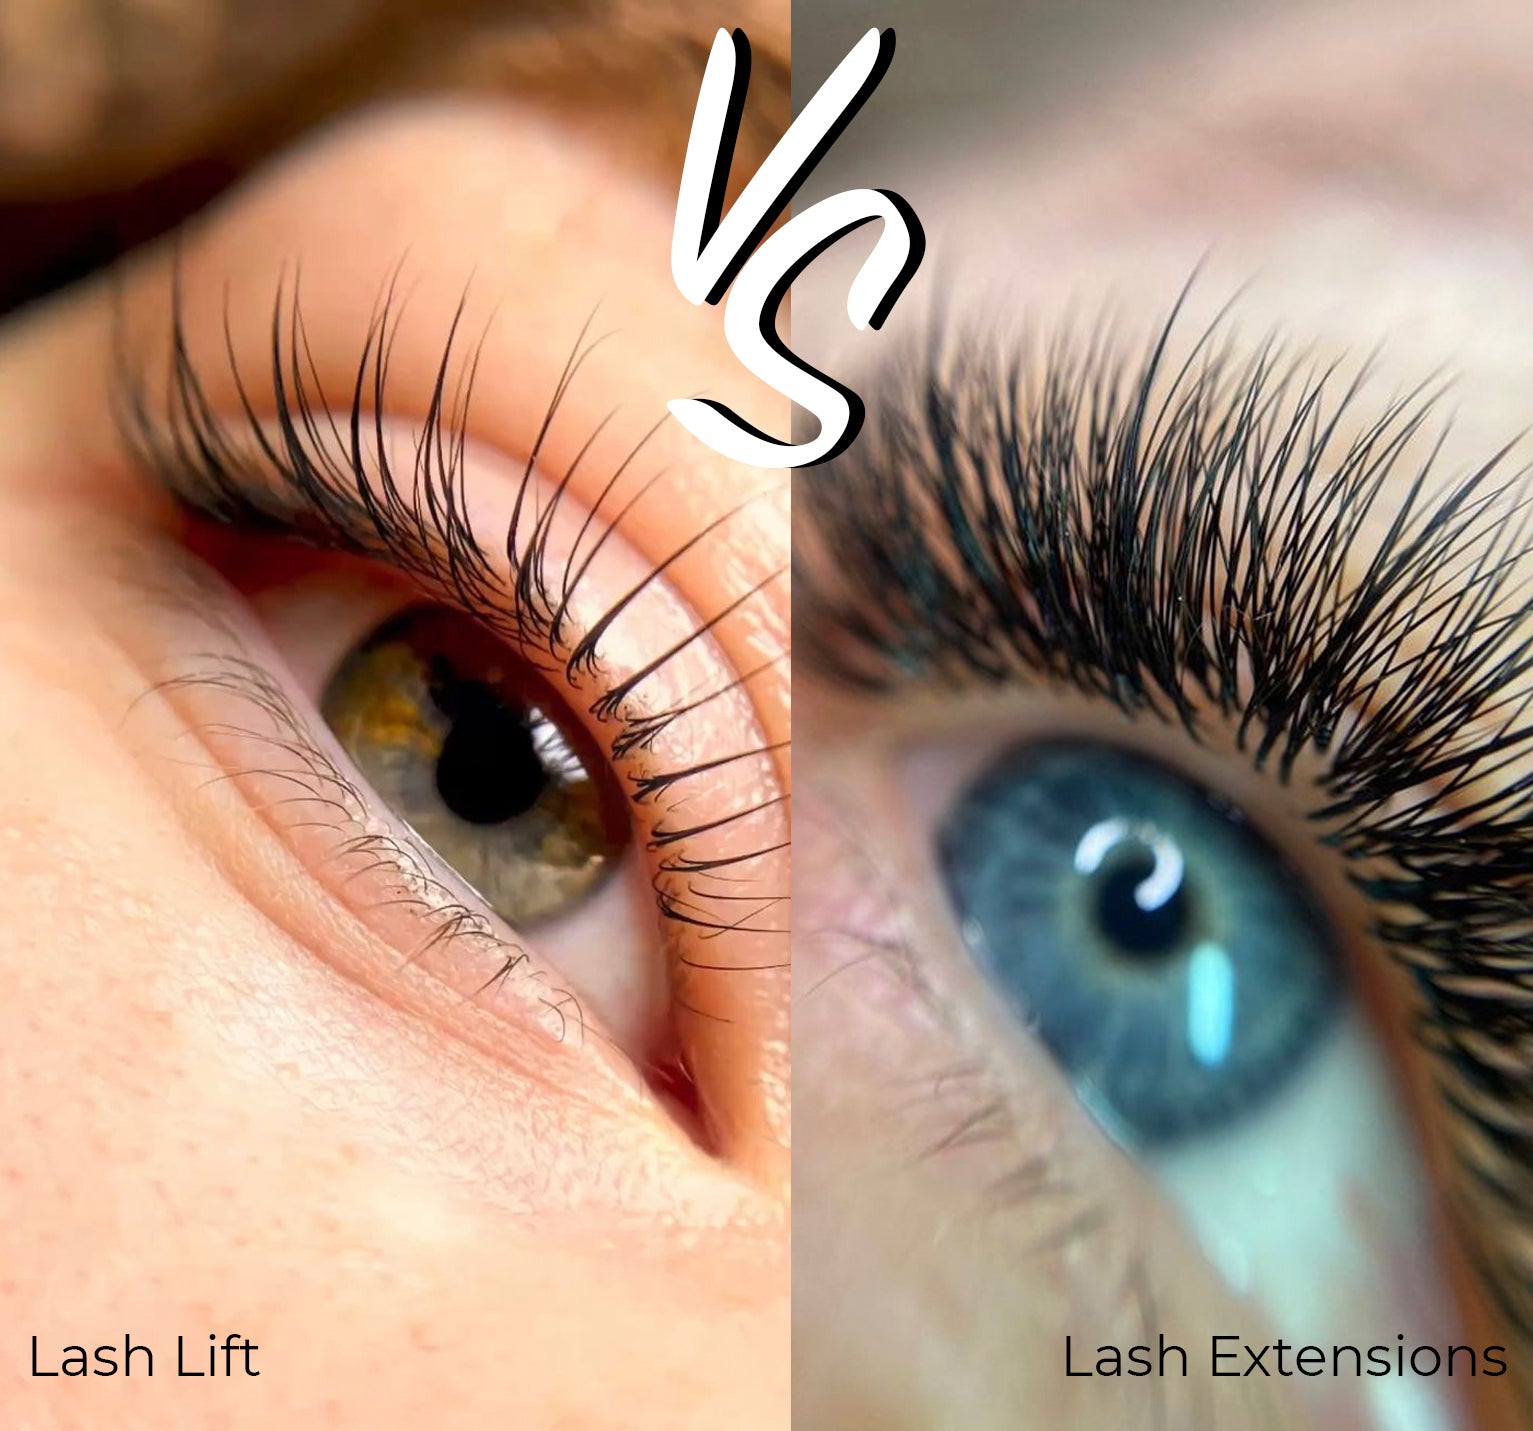 Lash Lift vs. Lash Extensions: Which is Right for You?